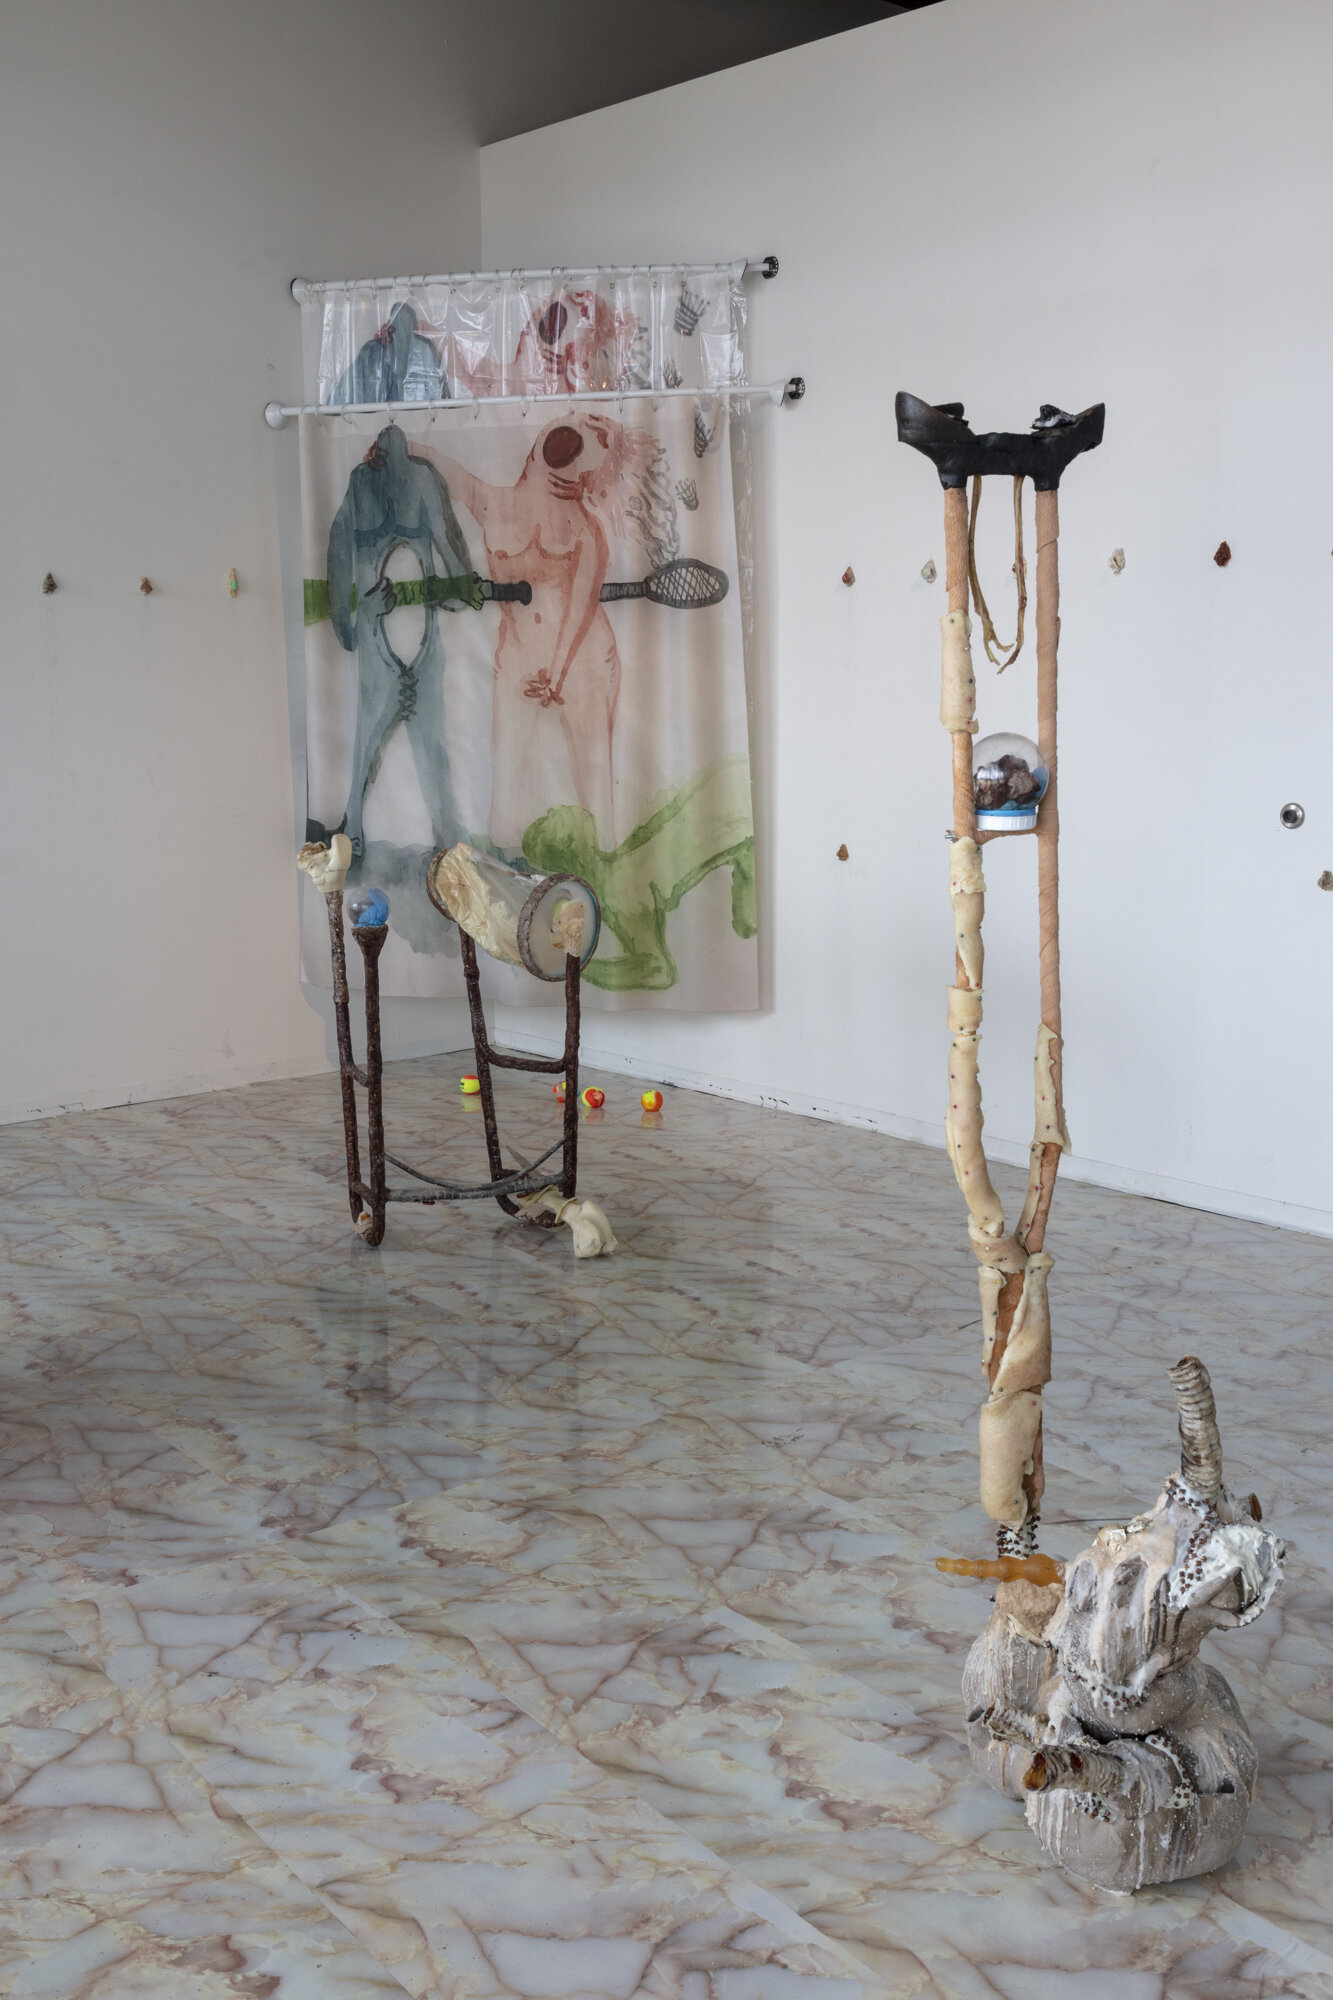  Lauren Lee  (pit-a-pat) stabbing myself thru and through with a well-bruised banana , 2019 (installation view) Water color drawings, shower curtains, shower curtain rods, paraffin wax, doe urine, sheep's placenta, used walker, used crutch, epoxy cla